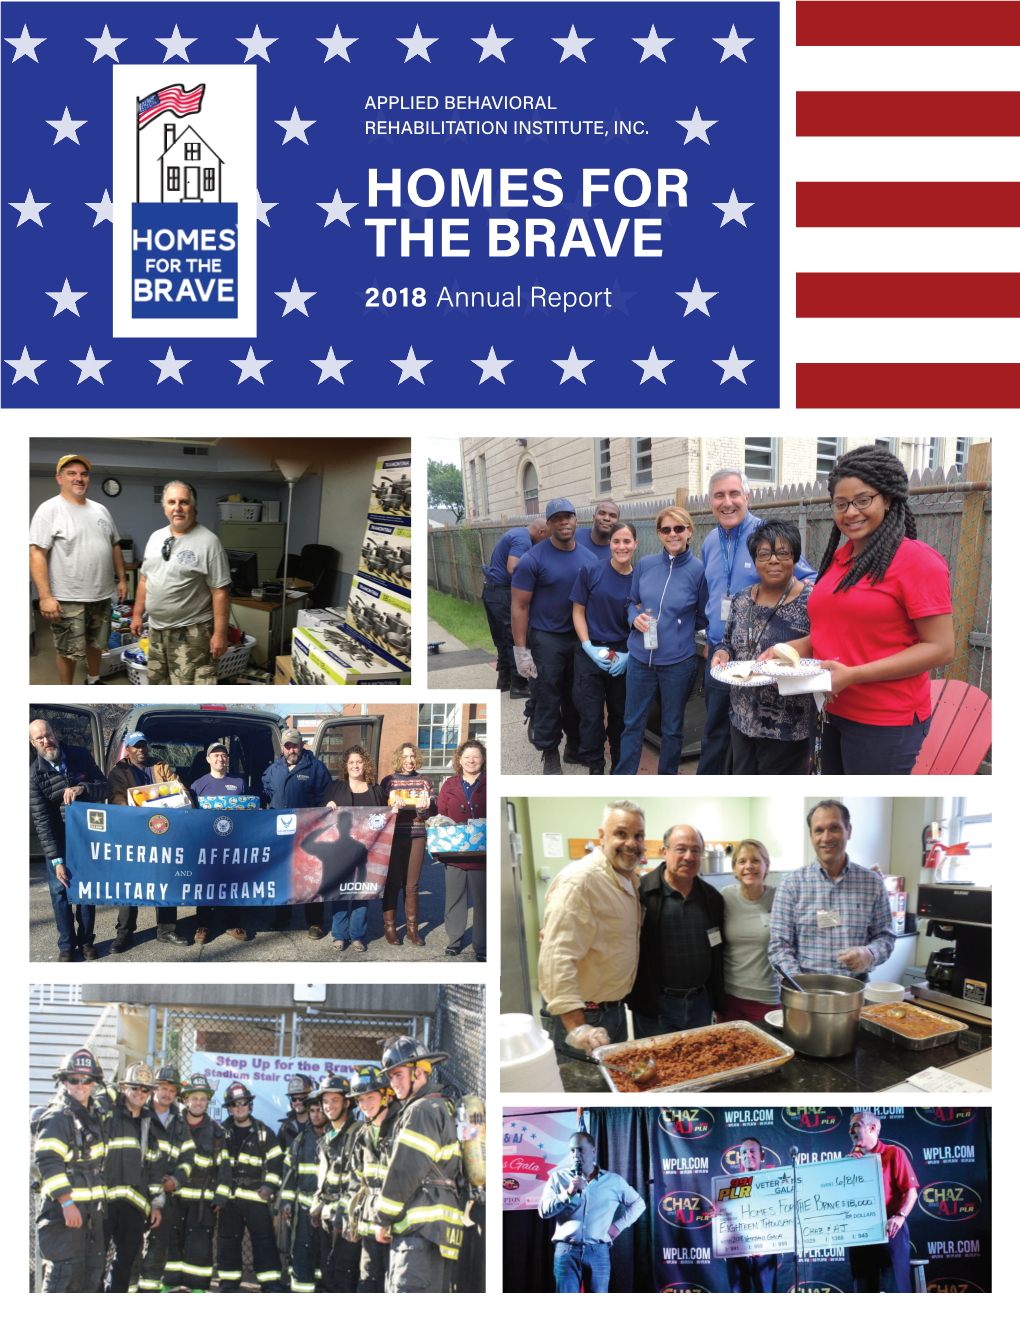 Eport Mission with an Emphasis on Veterans, We Provide the Housing and Services Necessary to Help Homeless Individuals Return to a Productive and Meaningful Life